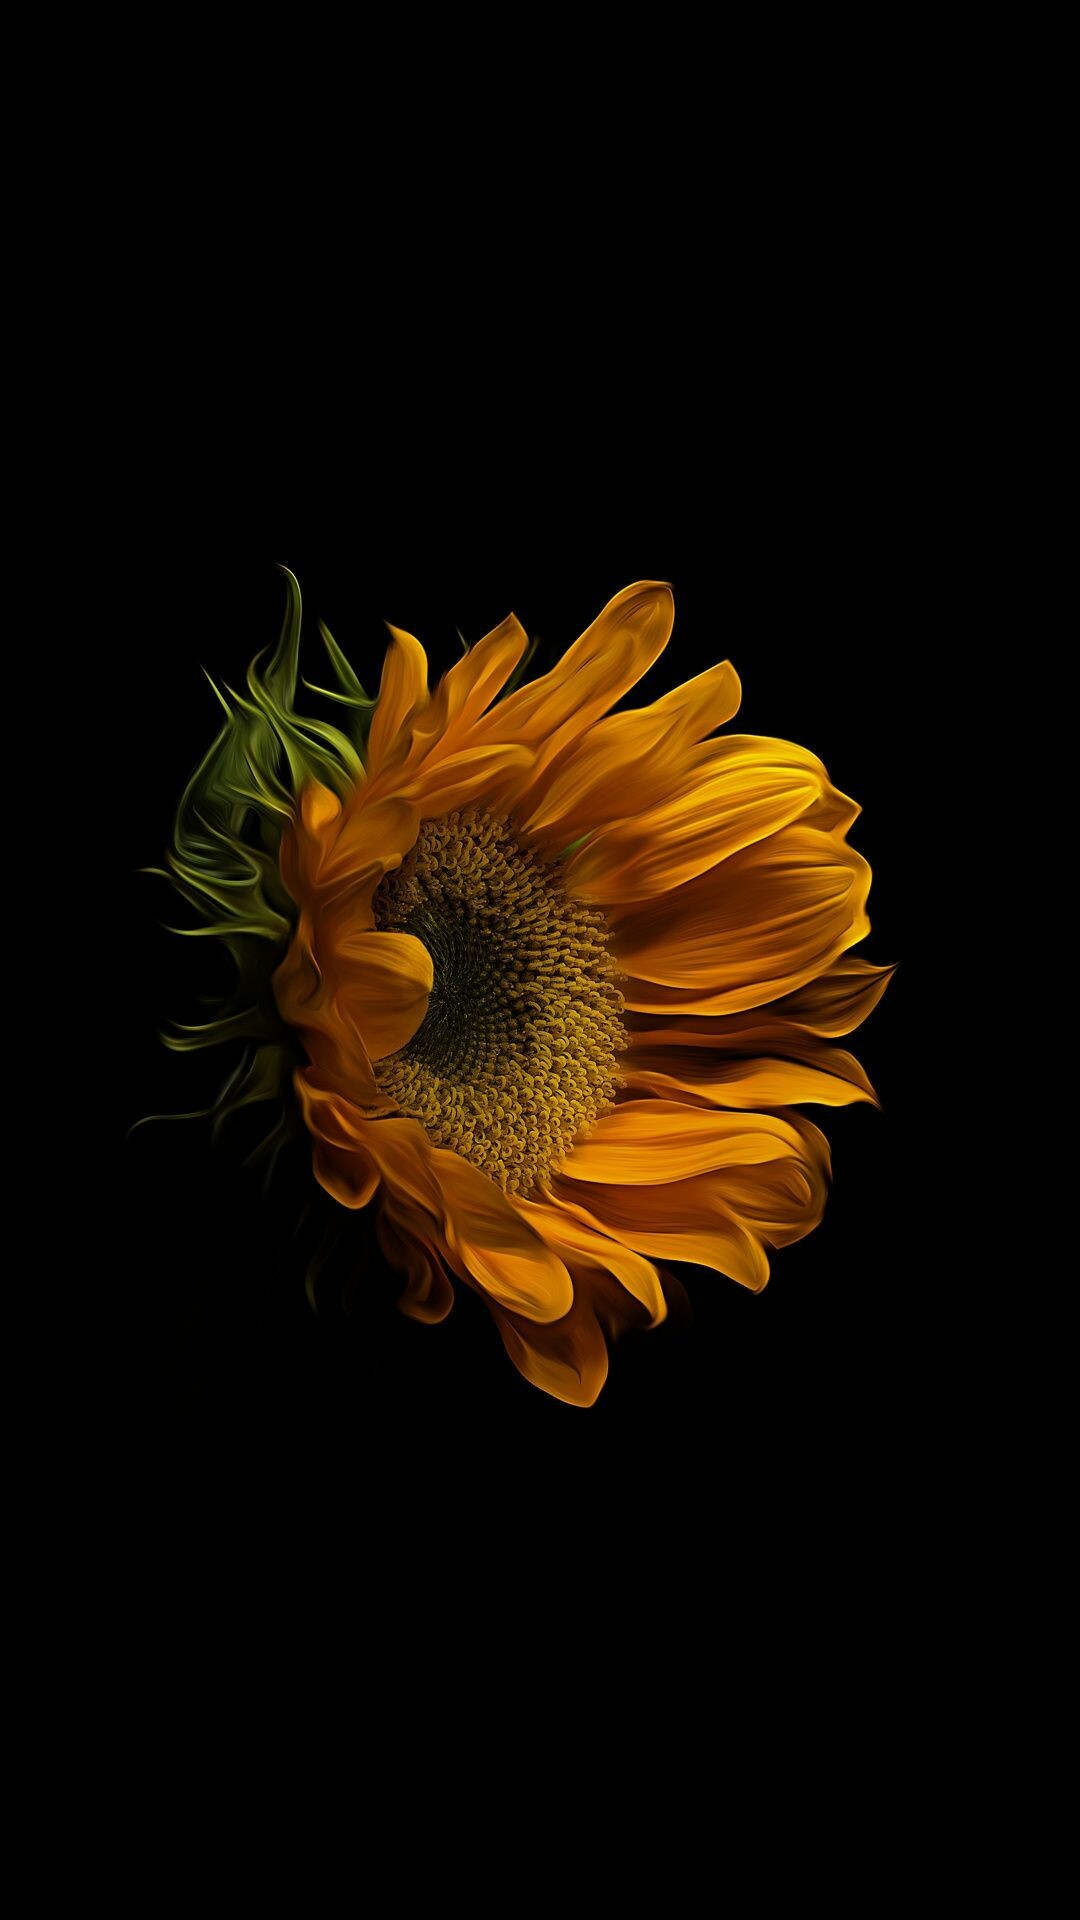 Sunflower: With bright blooms that go all summer, sunflowers are heat-tolerant, resistant to pests, and attractive to pollinators and birds. 1080x1920 Full HD Background.